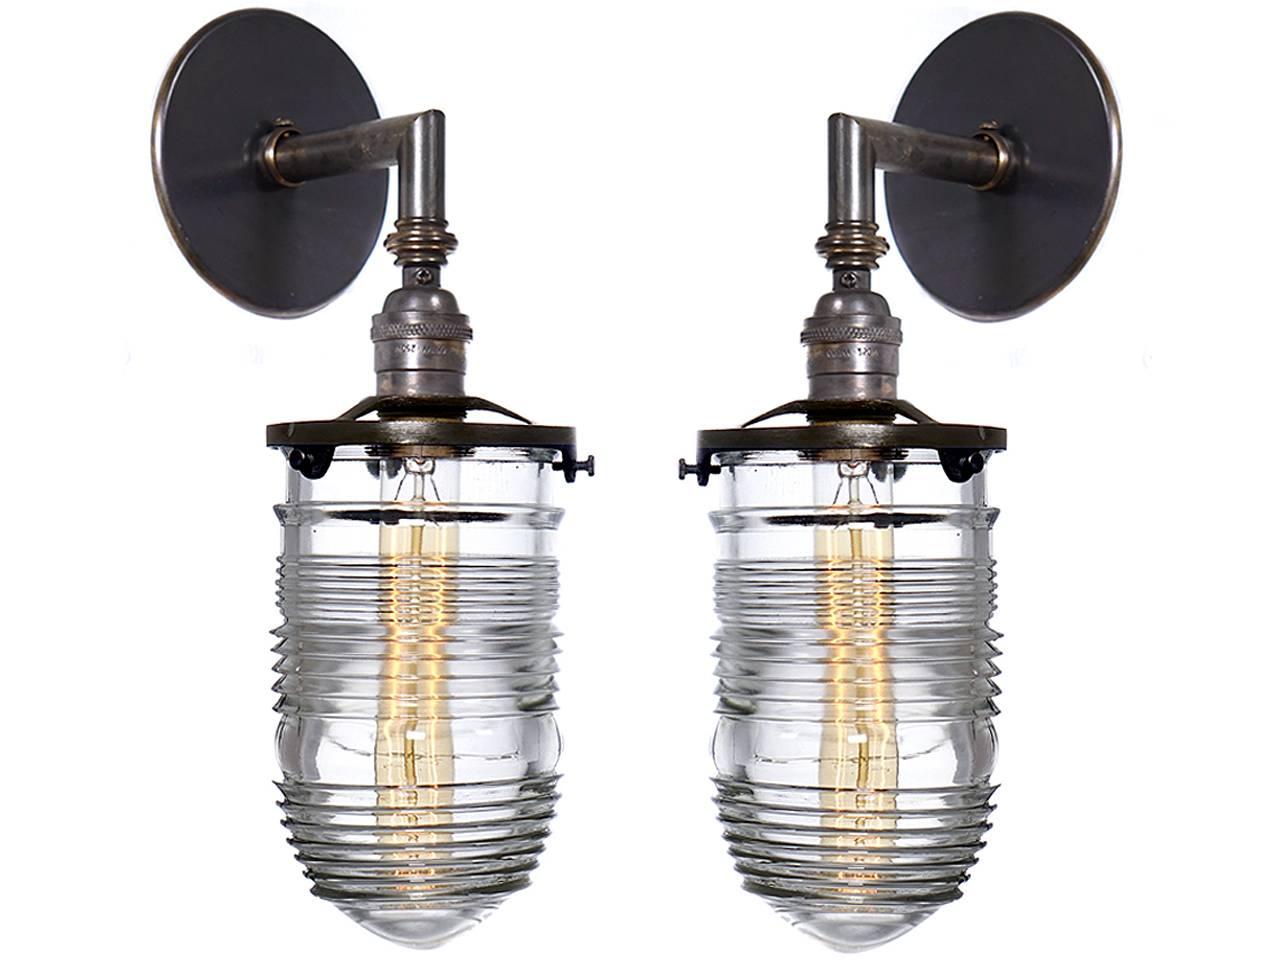 This small heavy glass lamp is just the right size. It has a 4.5 inch diameter lens and is as with all prismatic glass it sheds a beautiful even light and is as simple as can be. We have a number of these in stock. Try different bulbs for a